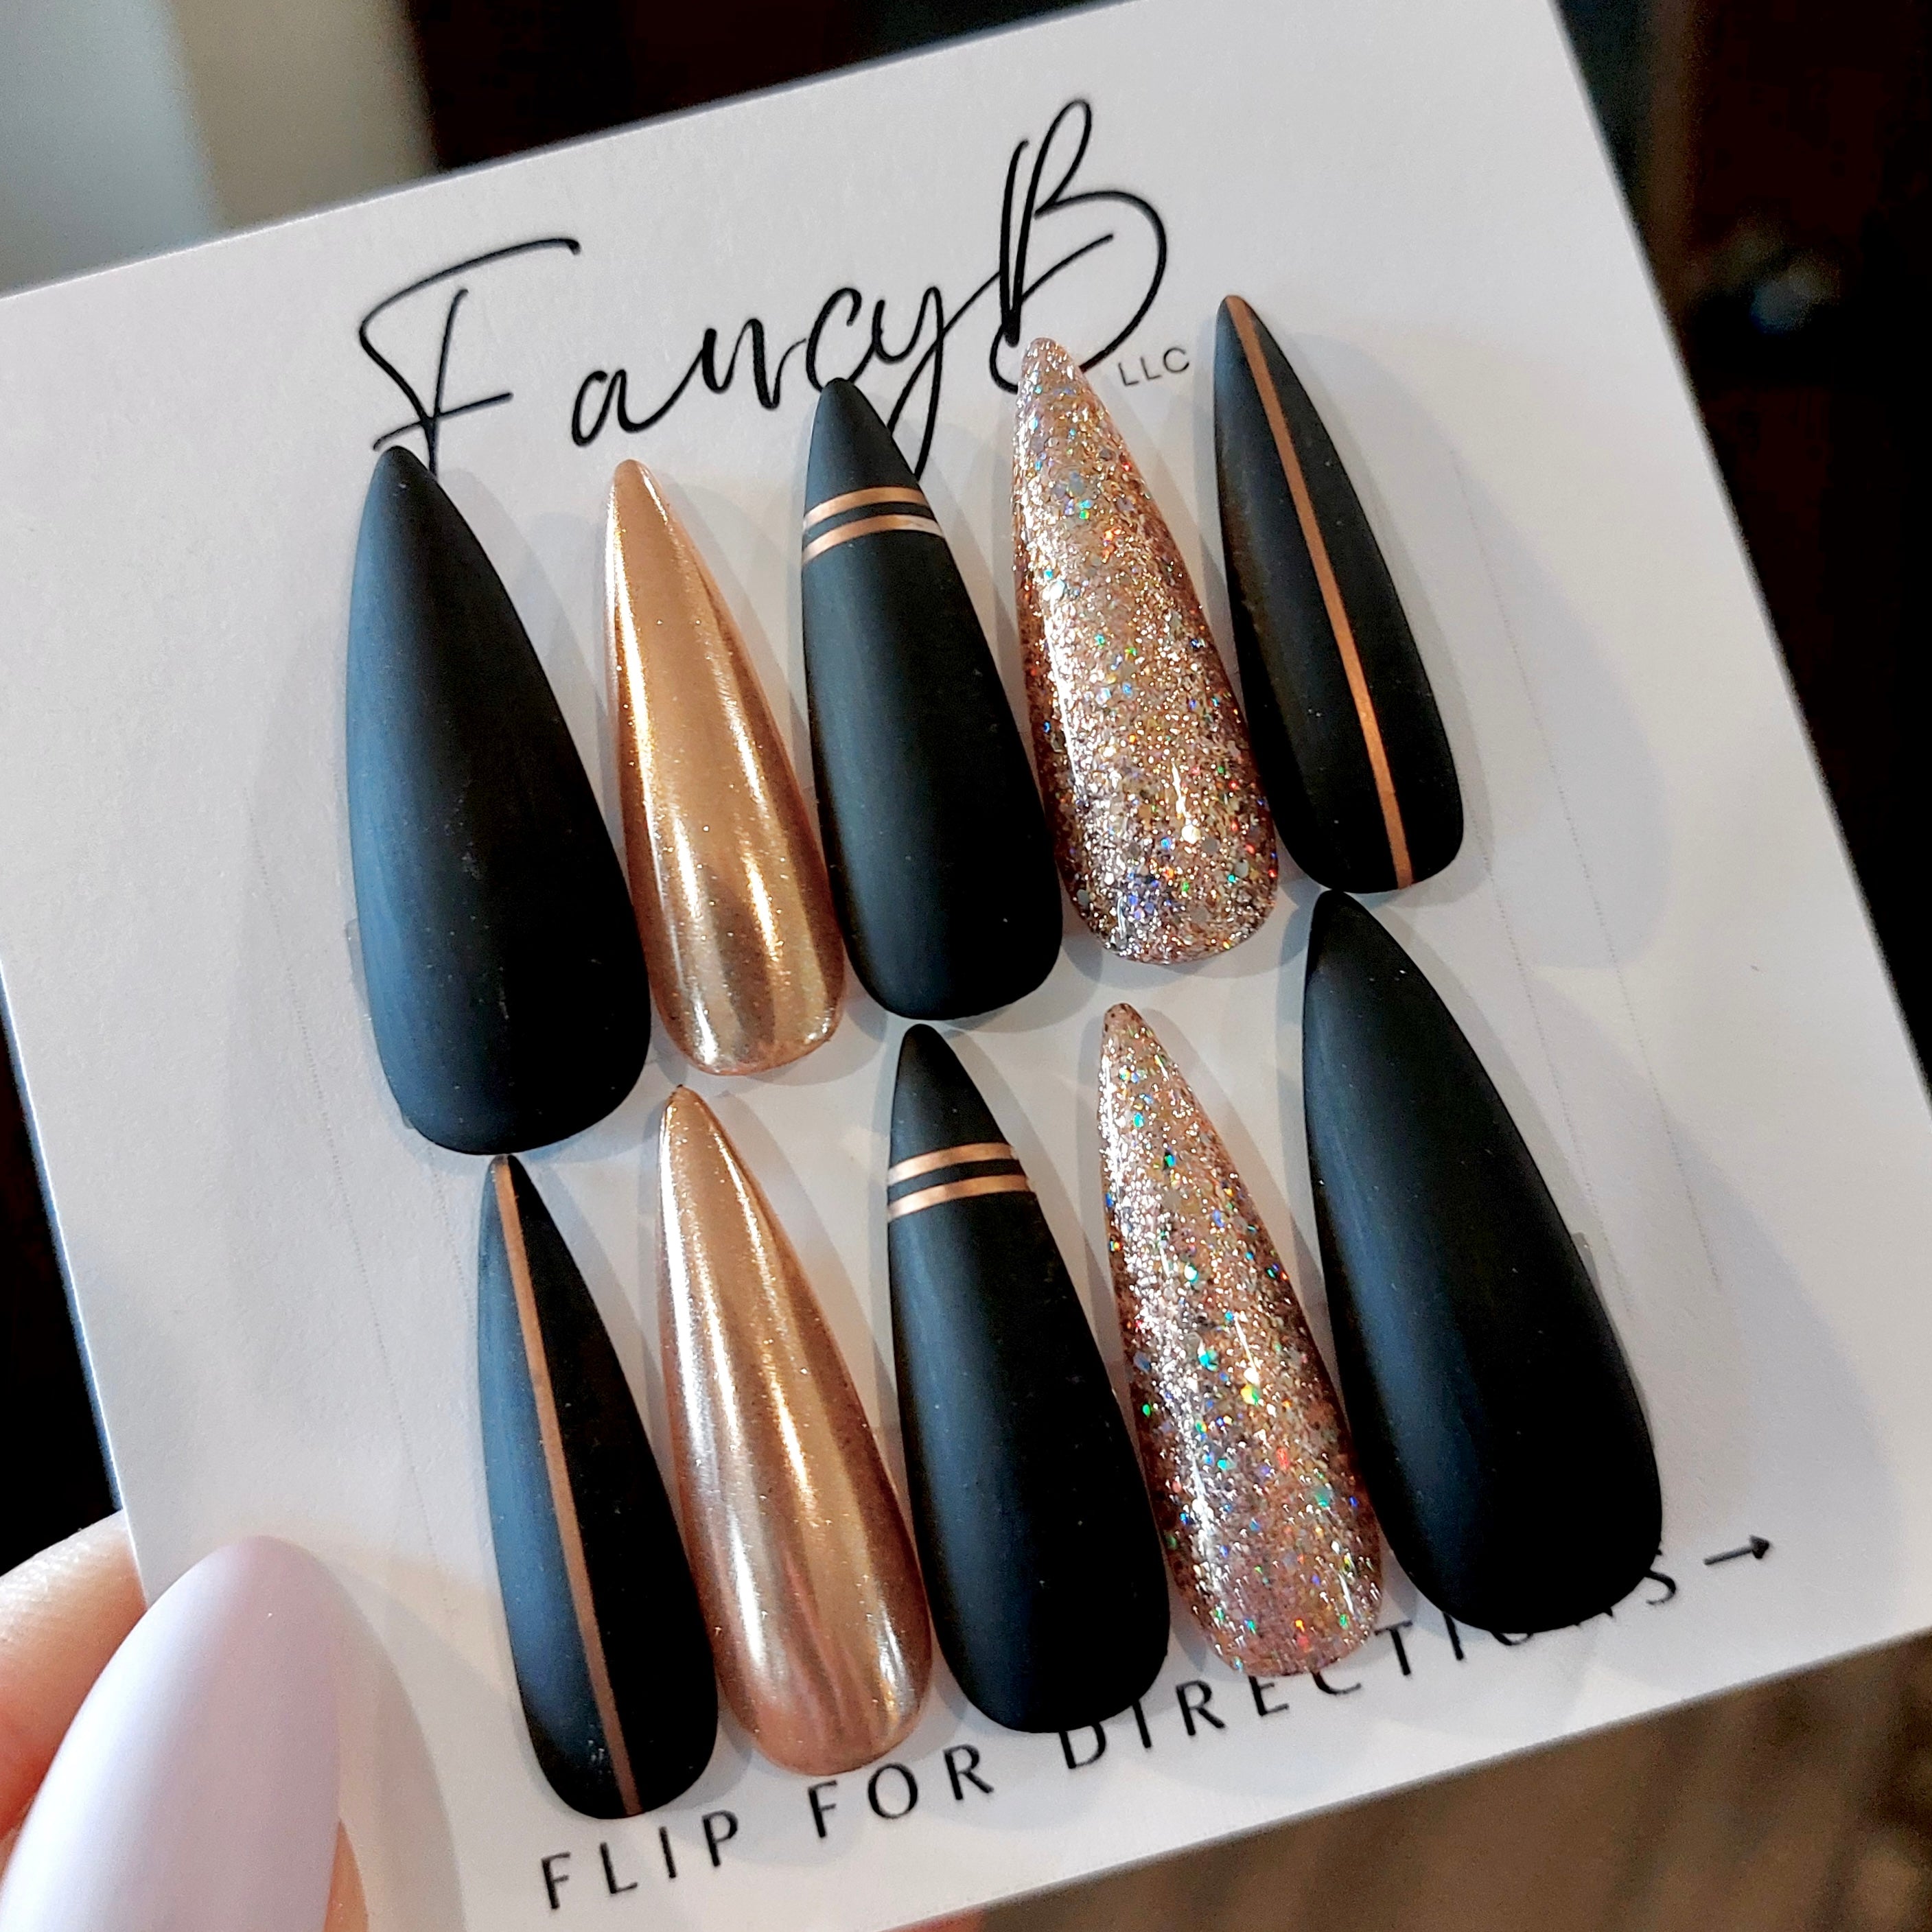 Custom press on nails matte black with rose gold chrome accents and rose gold glitter in a long stiletto shape. FancyB Nails.